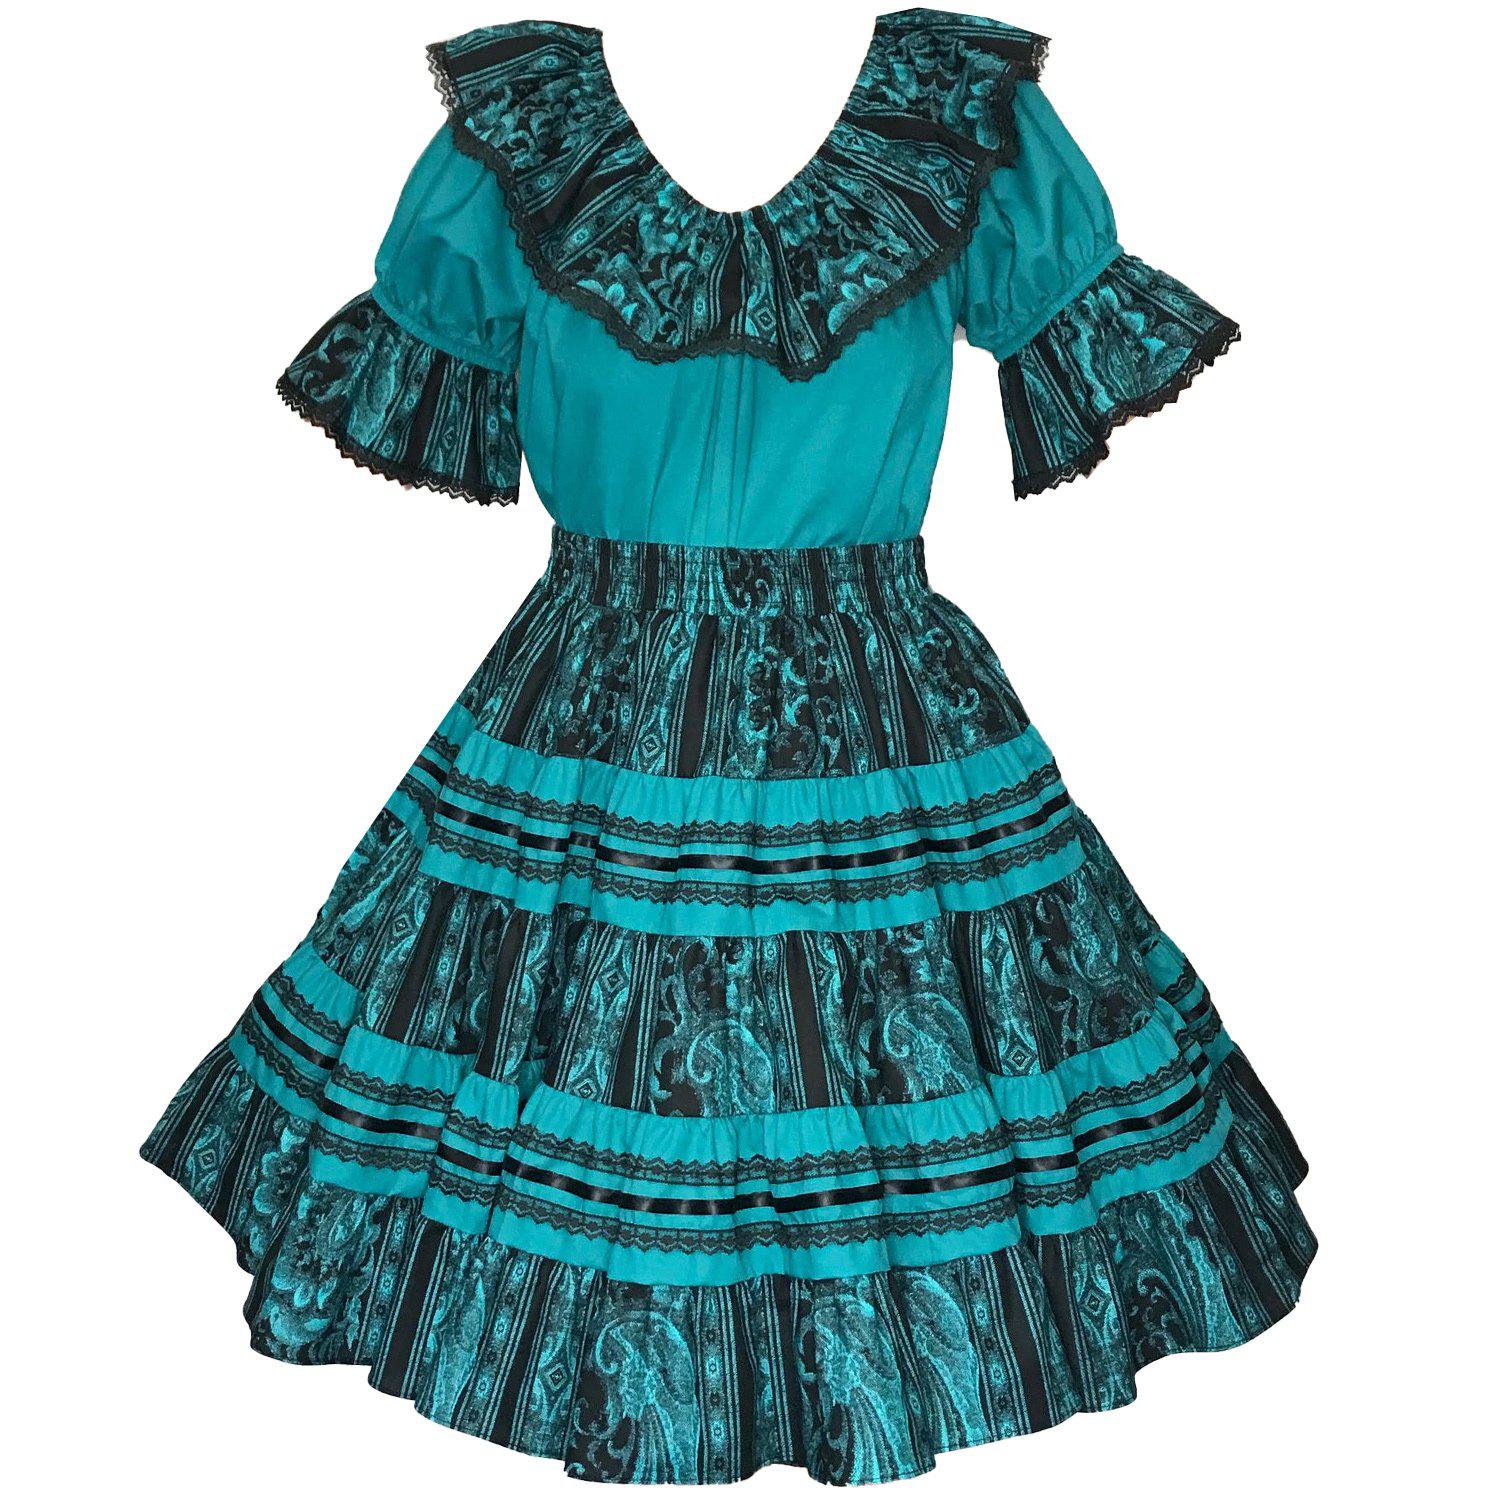 A turquoise and black Regal Stripe Square Dance Outfit with ruffles made from striped fabric, perfect for square dancing by Square Up Fashions.